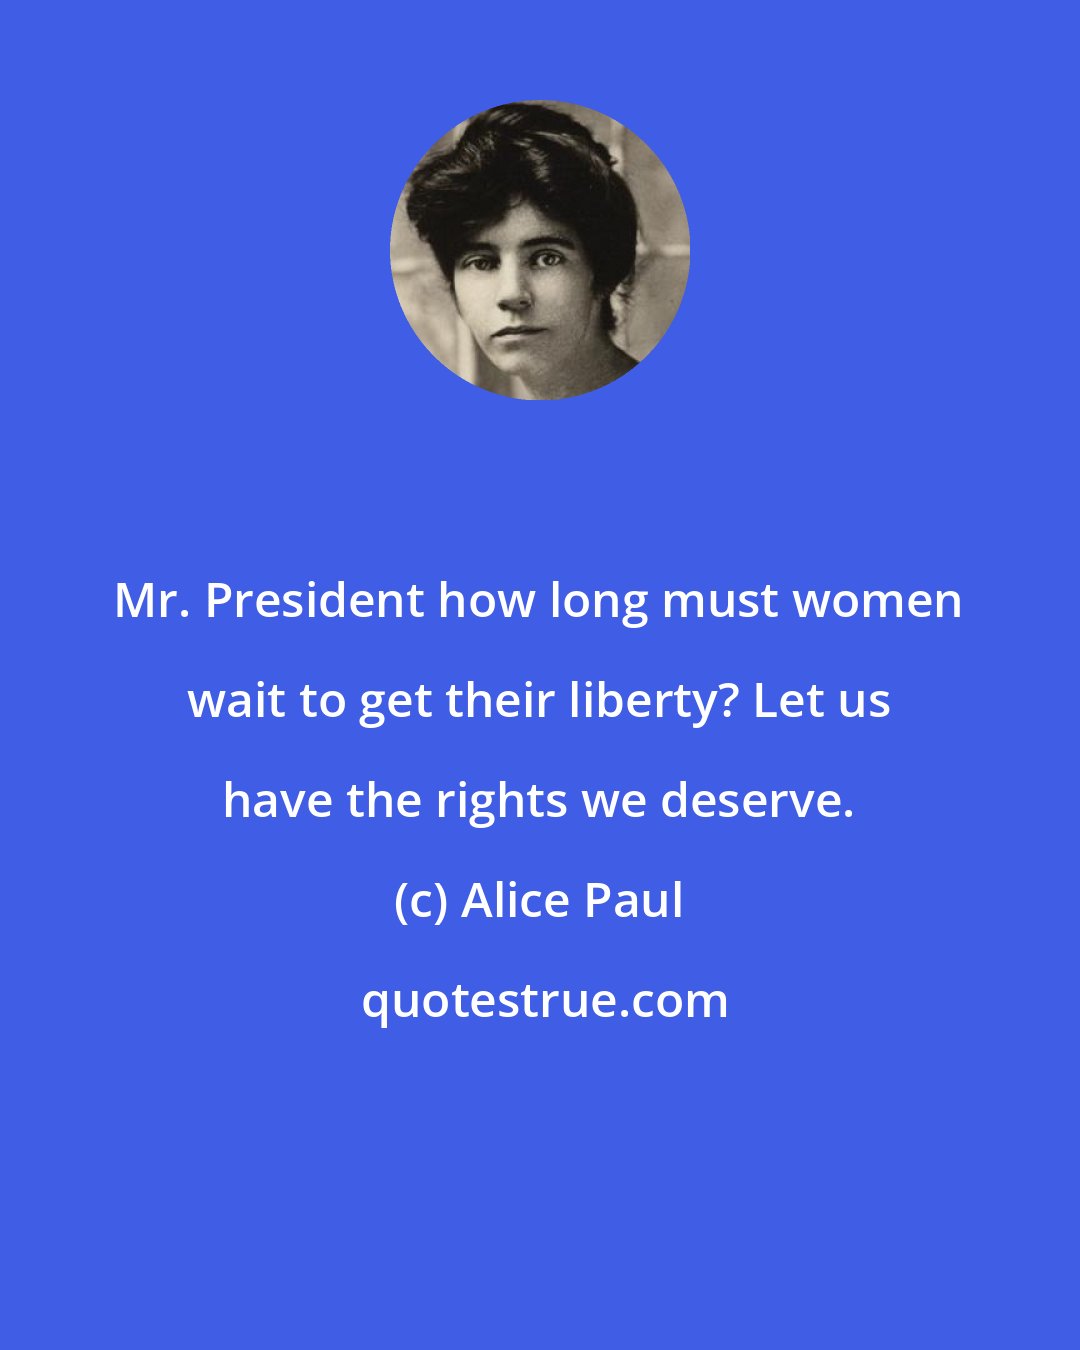 Alice Paul: Mr. President how long must women wait to get their liberty? Let us have the rights we deserve.